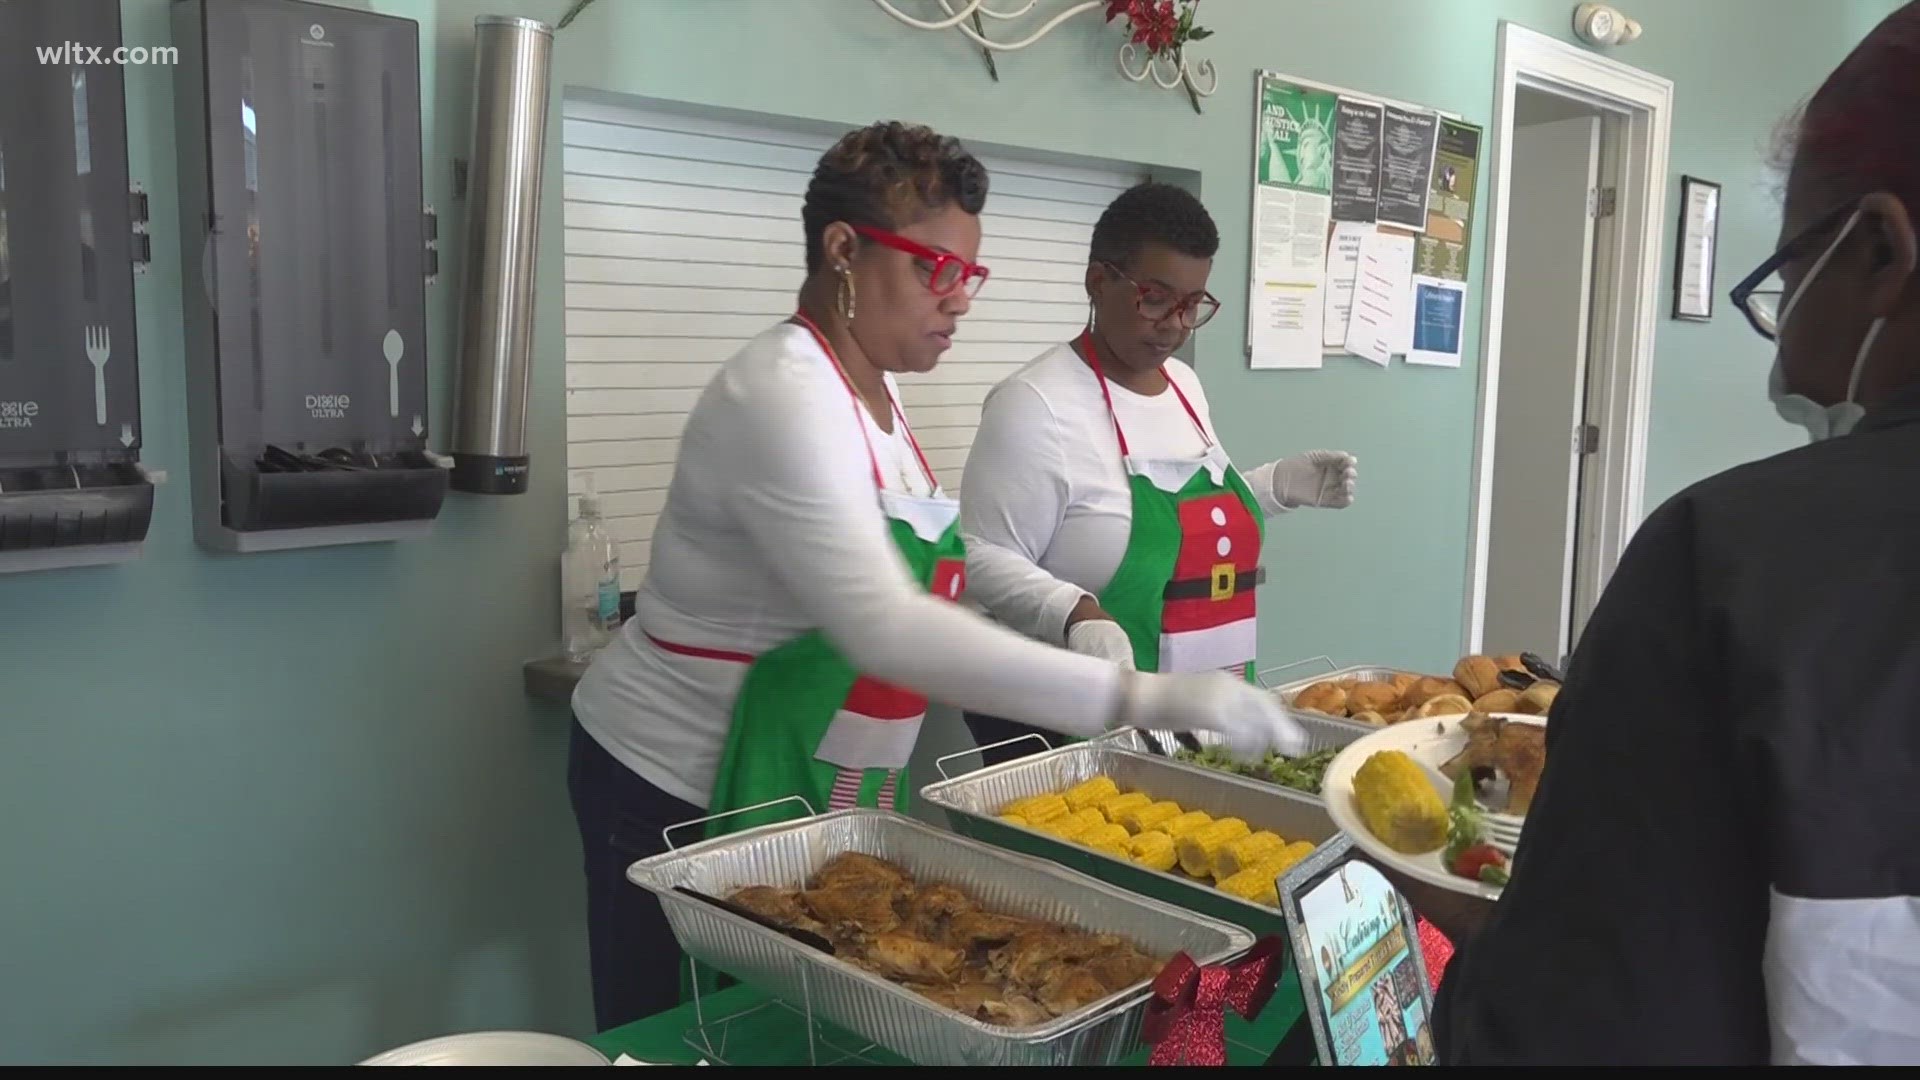 Roughly 50 hot meals were prepared by Mama's Kreative Treats & More and Kindley Prepared Catering, both of Hopkins.